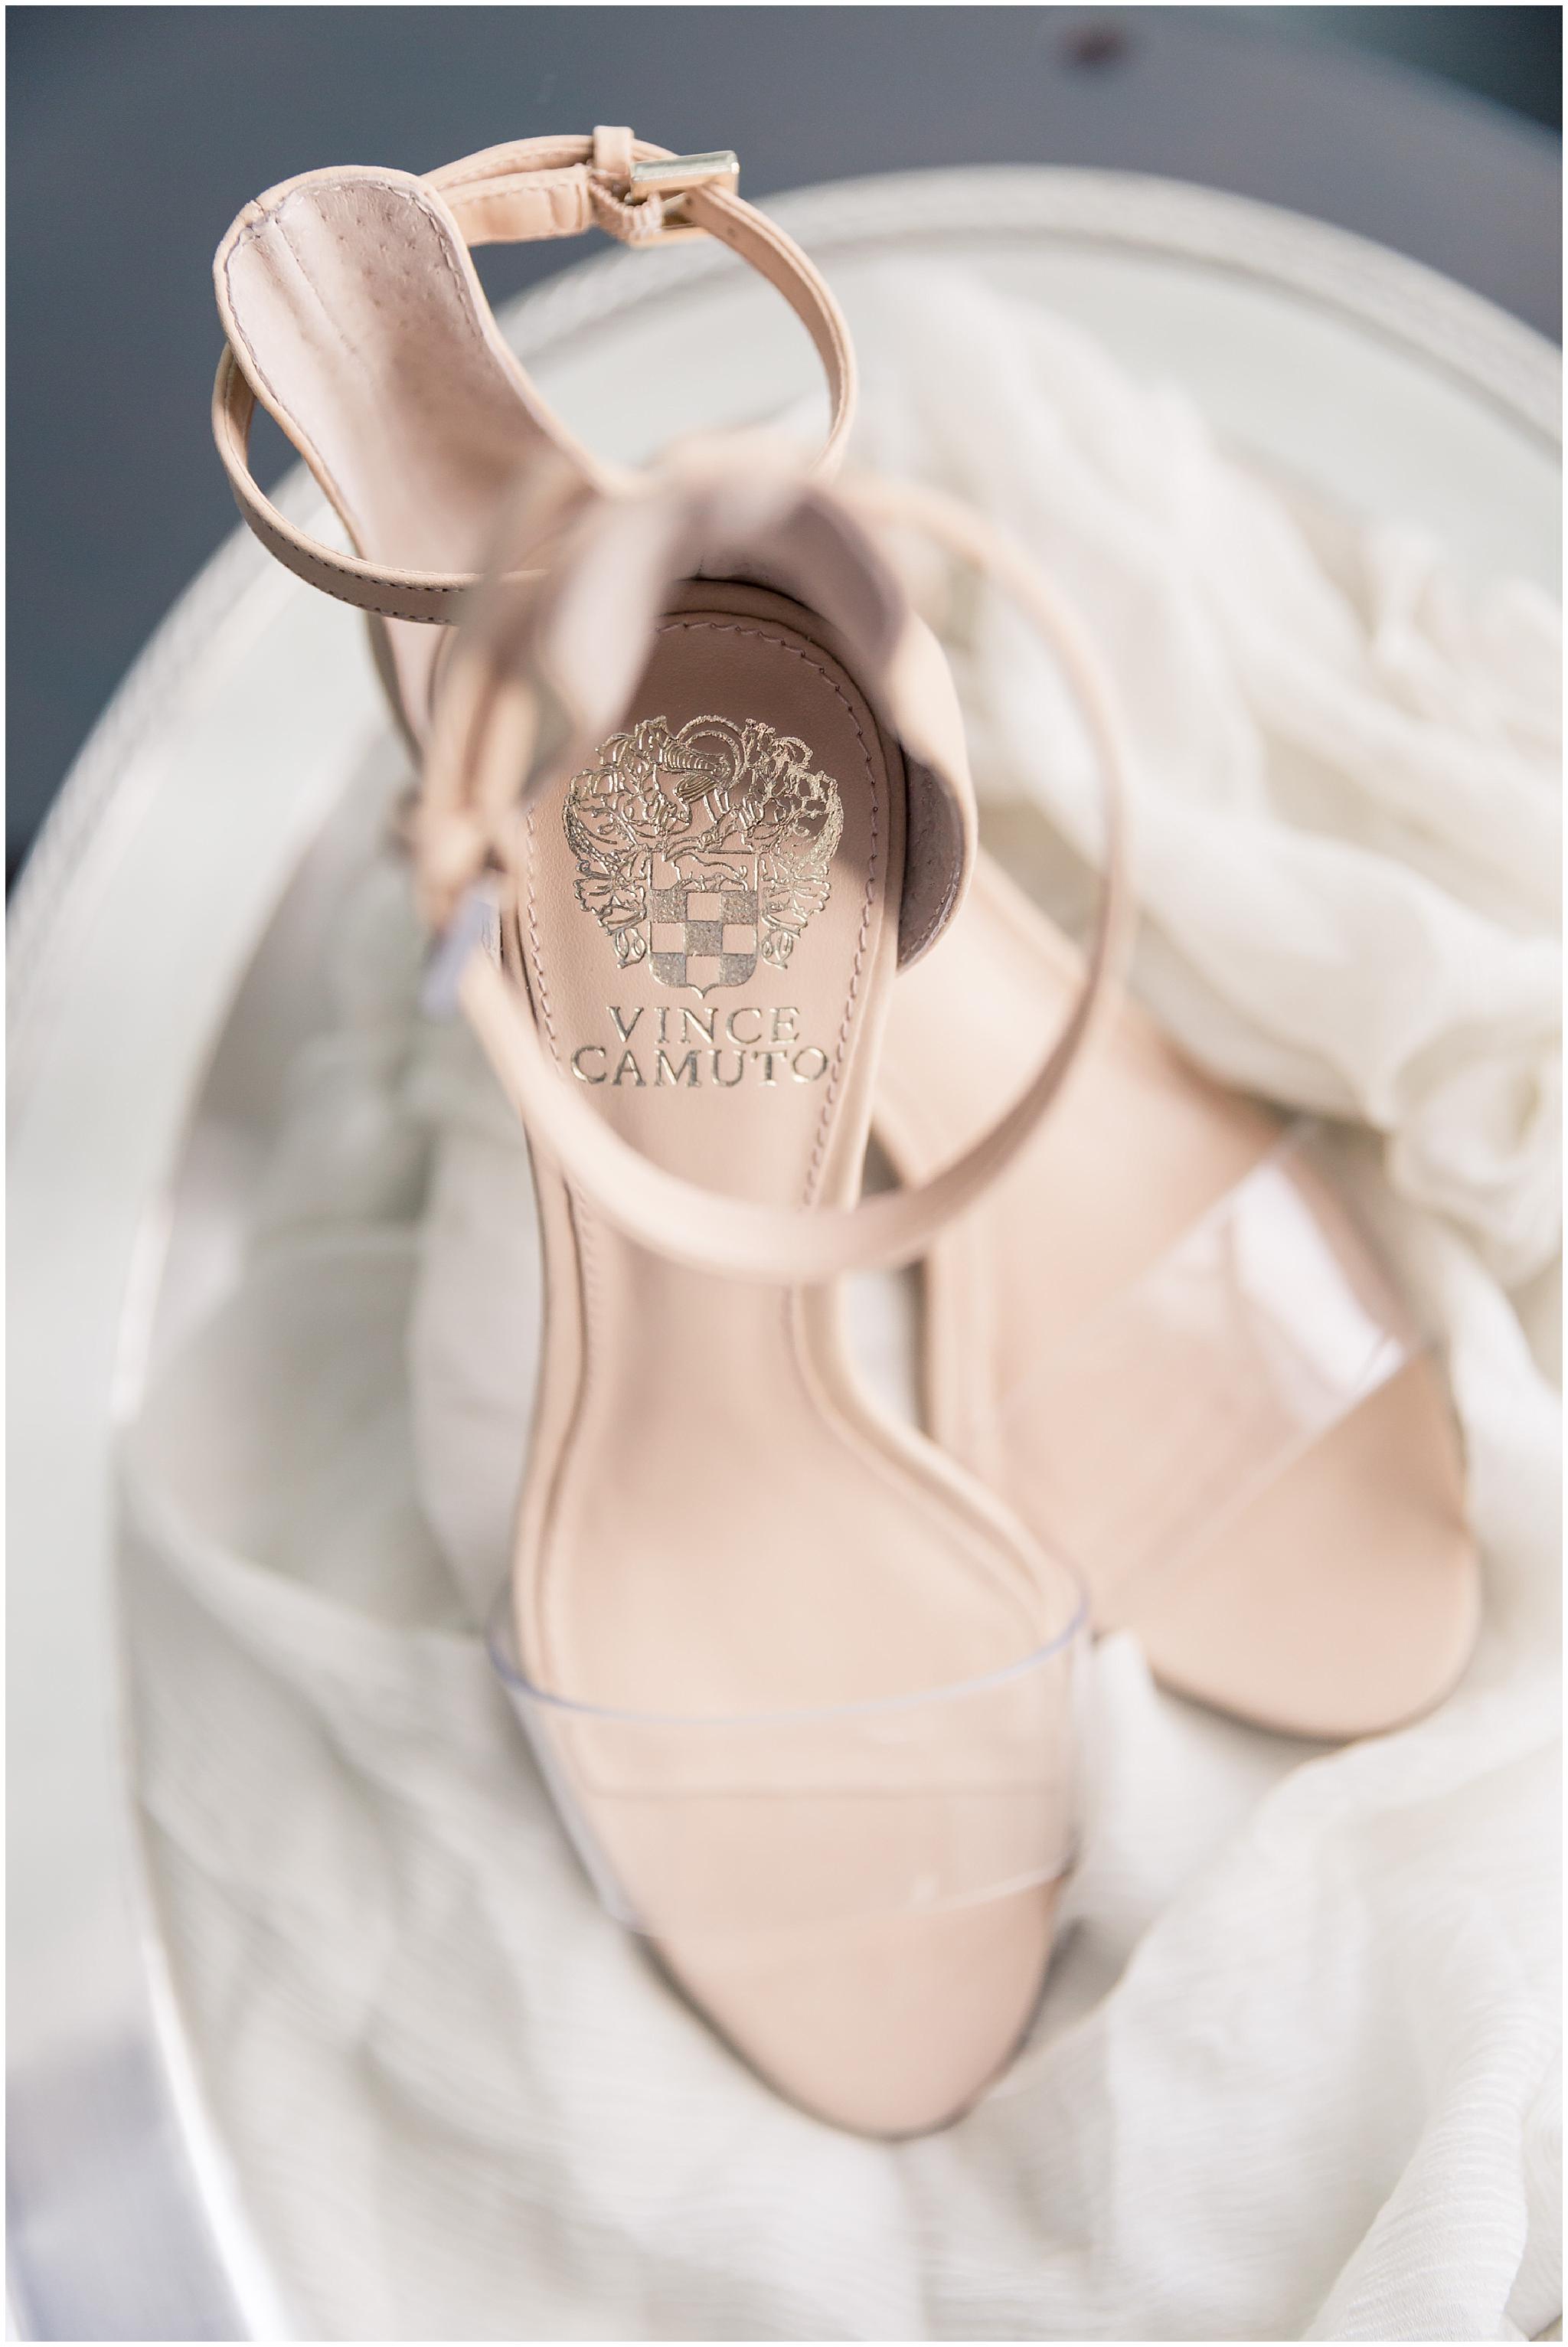 Wedding shoes ready to be worn by bride